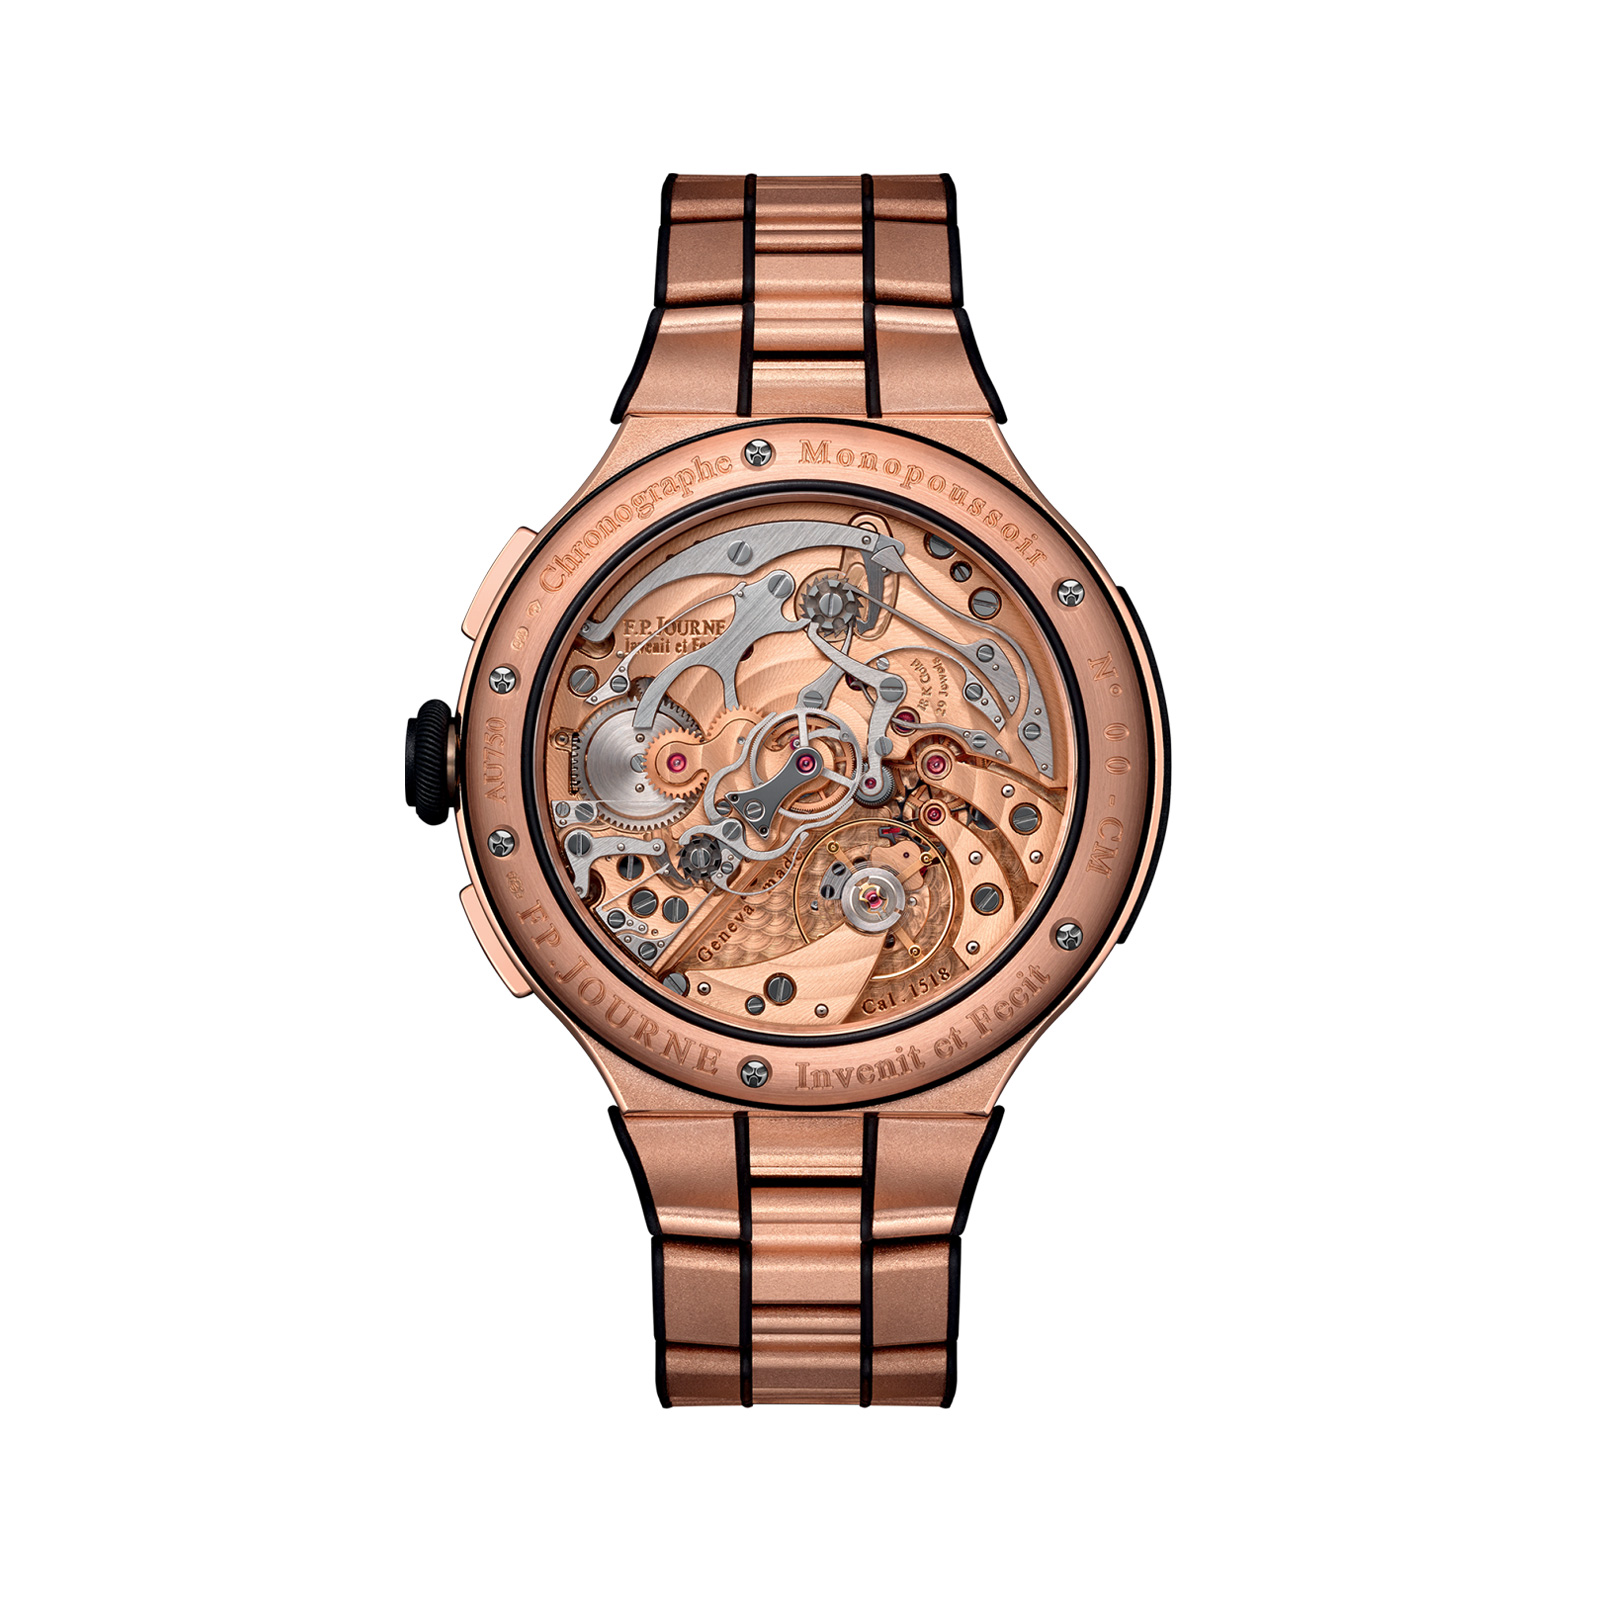 Chronographe Rattrapante 44mm Red Gold gallery 1